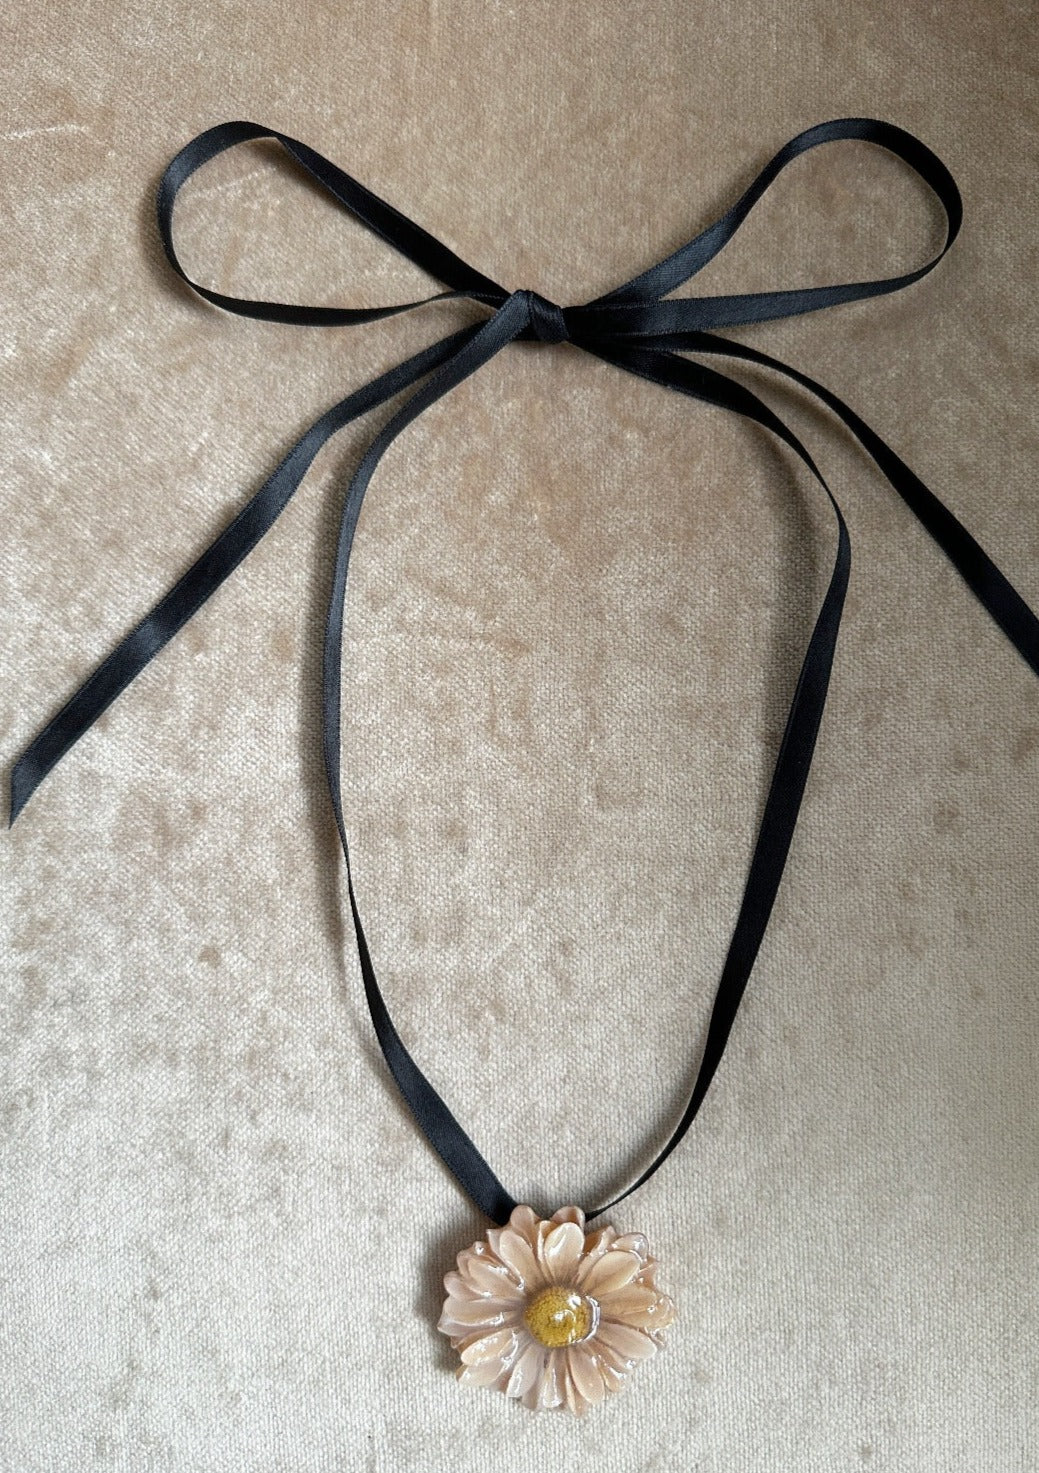 Ivory daisy pendant diped in resin suspended from a black satin ribbon.